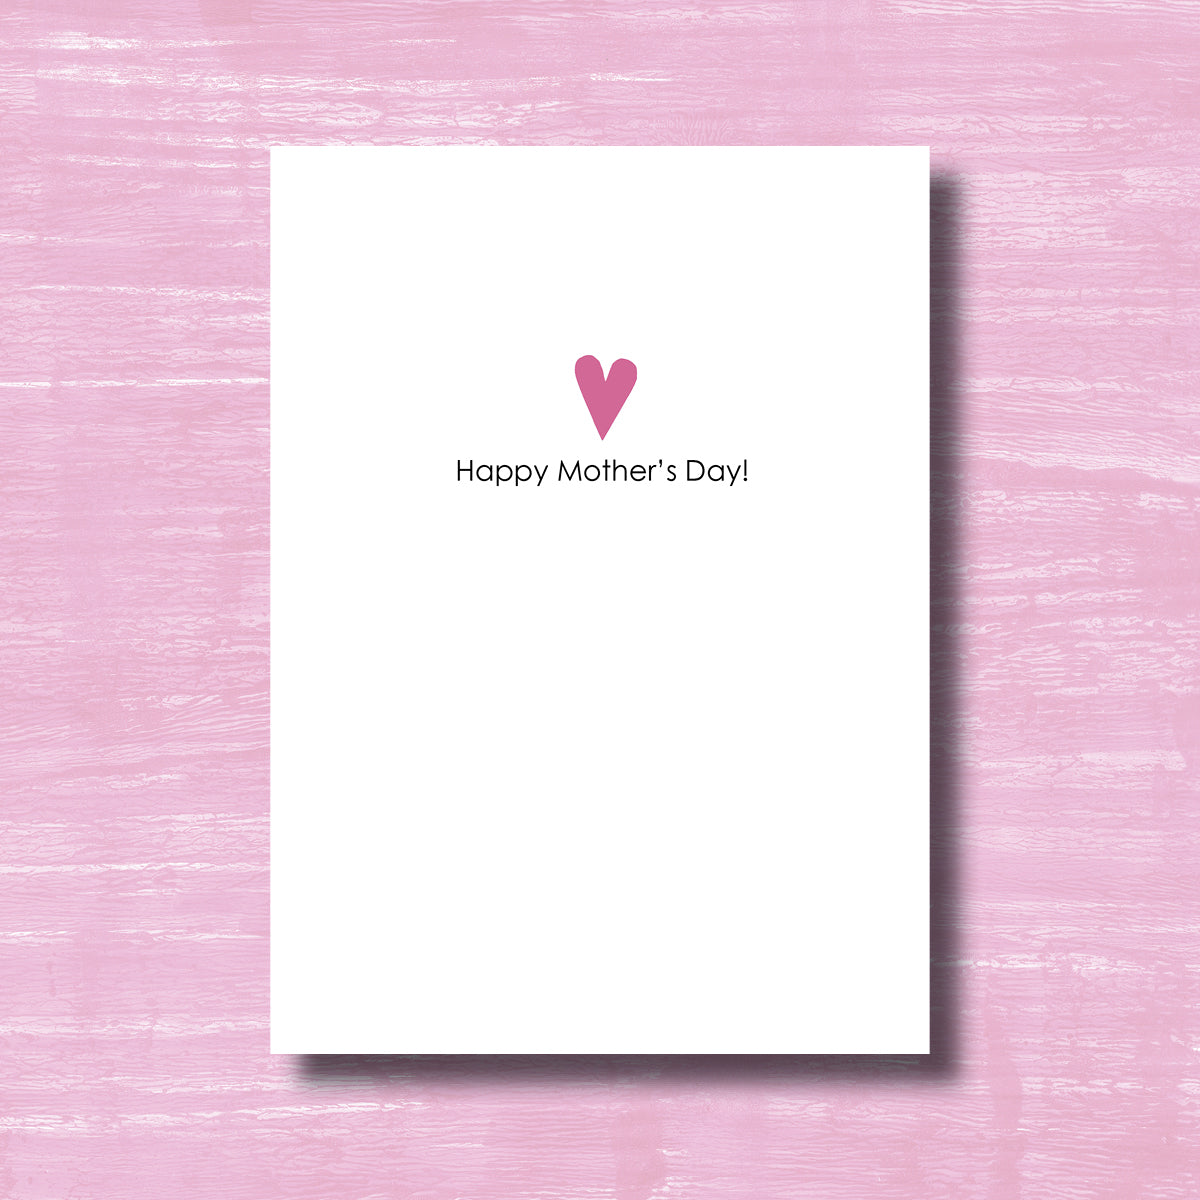 Best Mom Ever - Greeting Card